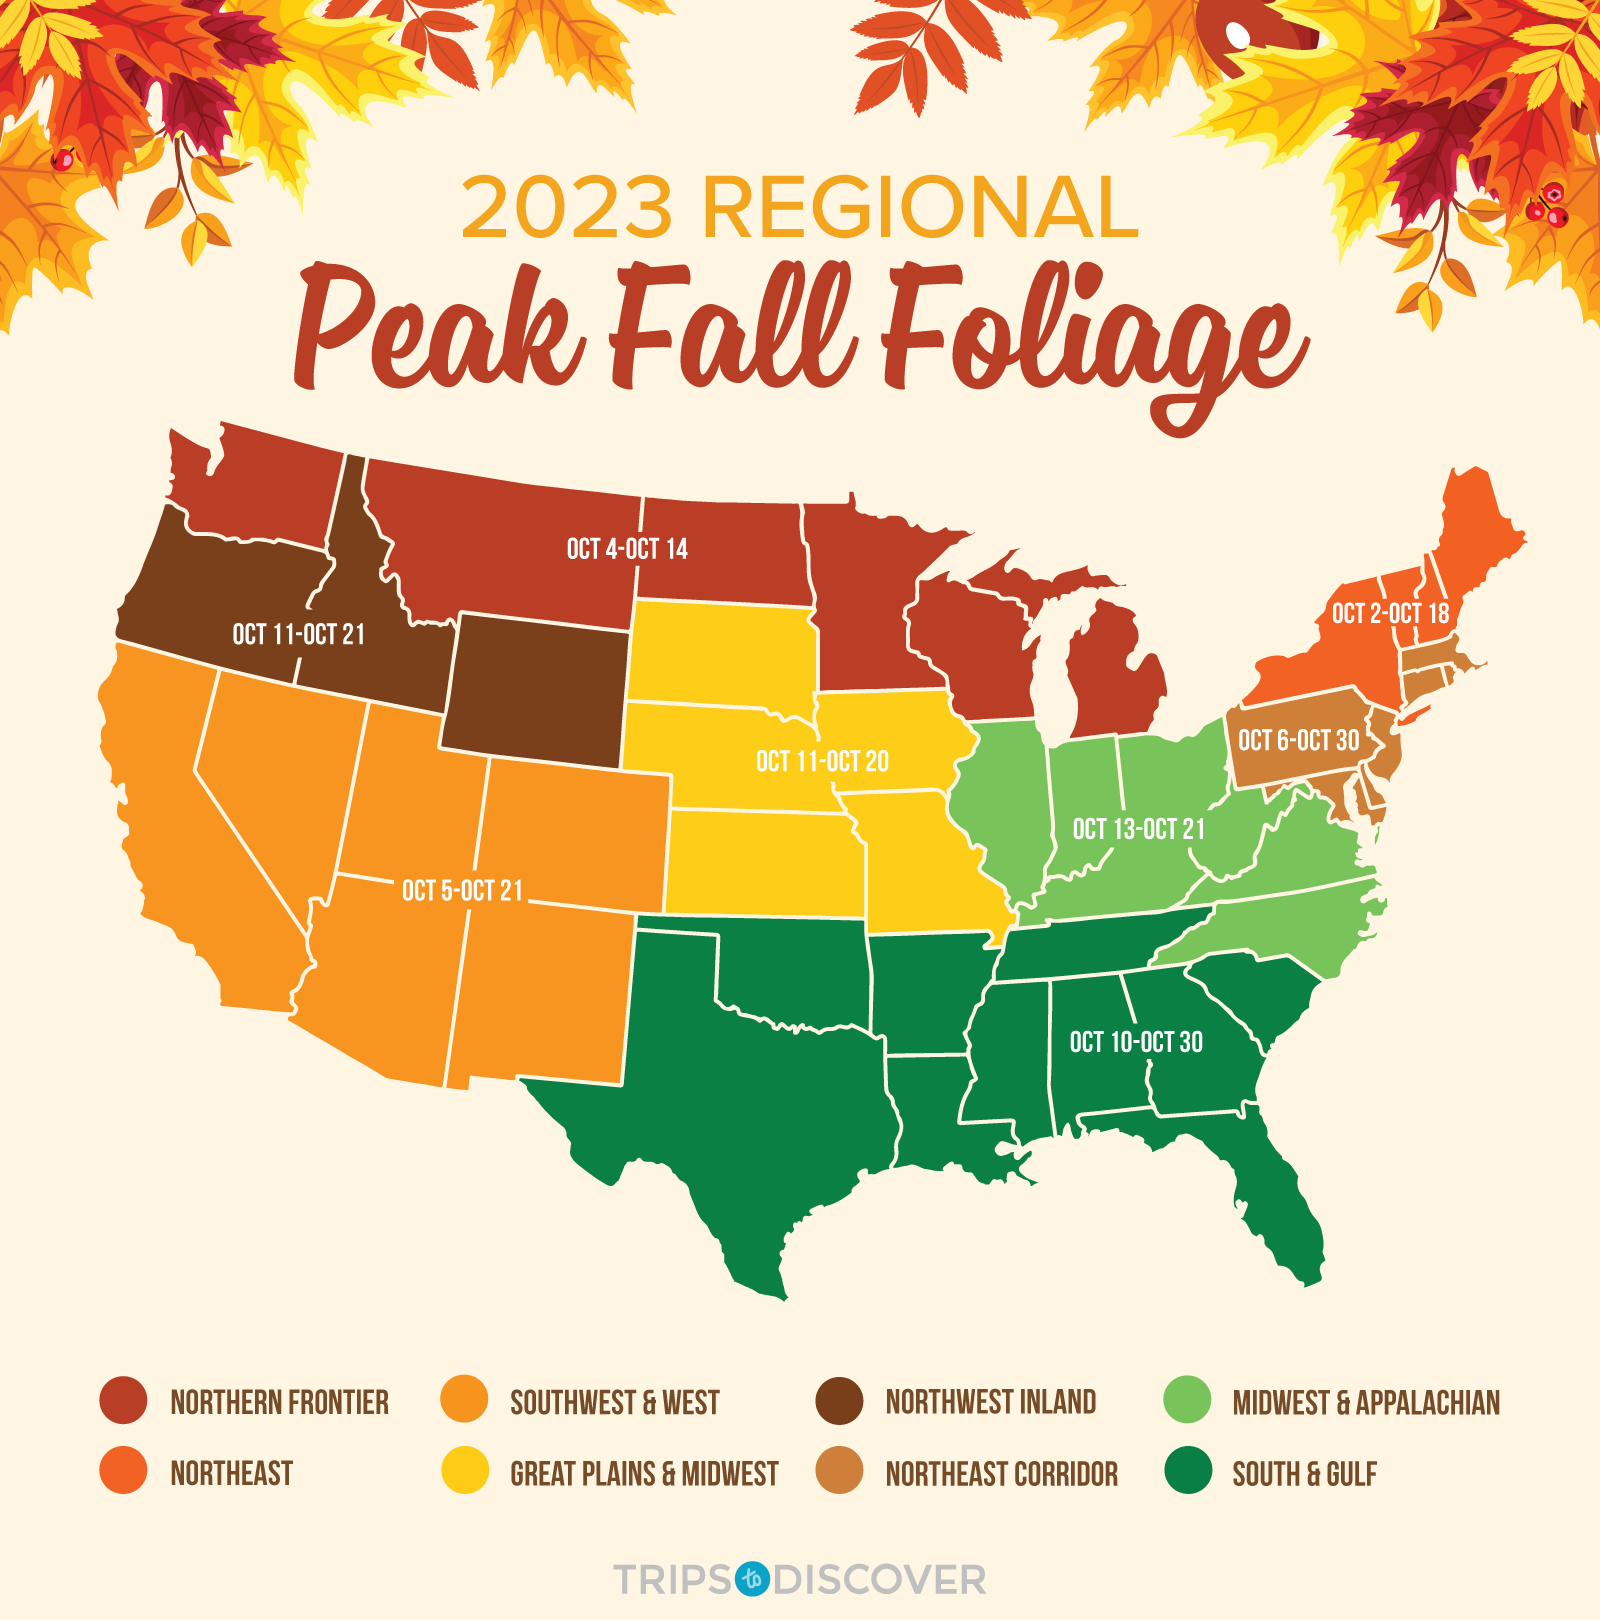 Map displaying the 2023 Regional Peak Fall Foliage dates across eight regions in the United States, with a color gradient from brown to green to indicate the progression of peak fall dates. Brown represents regions with earlier peak foliage, while green indicates regions with later peak foliage. Dates for each region's peak foliage are prominently displayed on the map above each respective area. A key is included, featuring color swatches next to the names of each region.